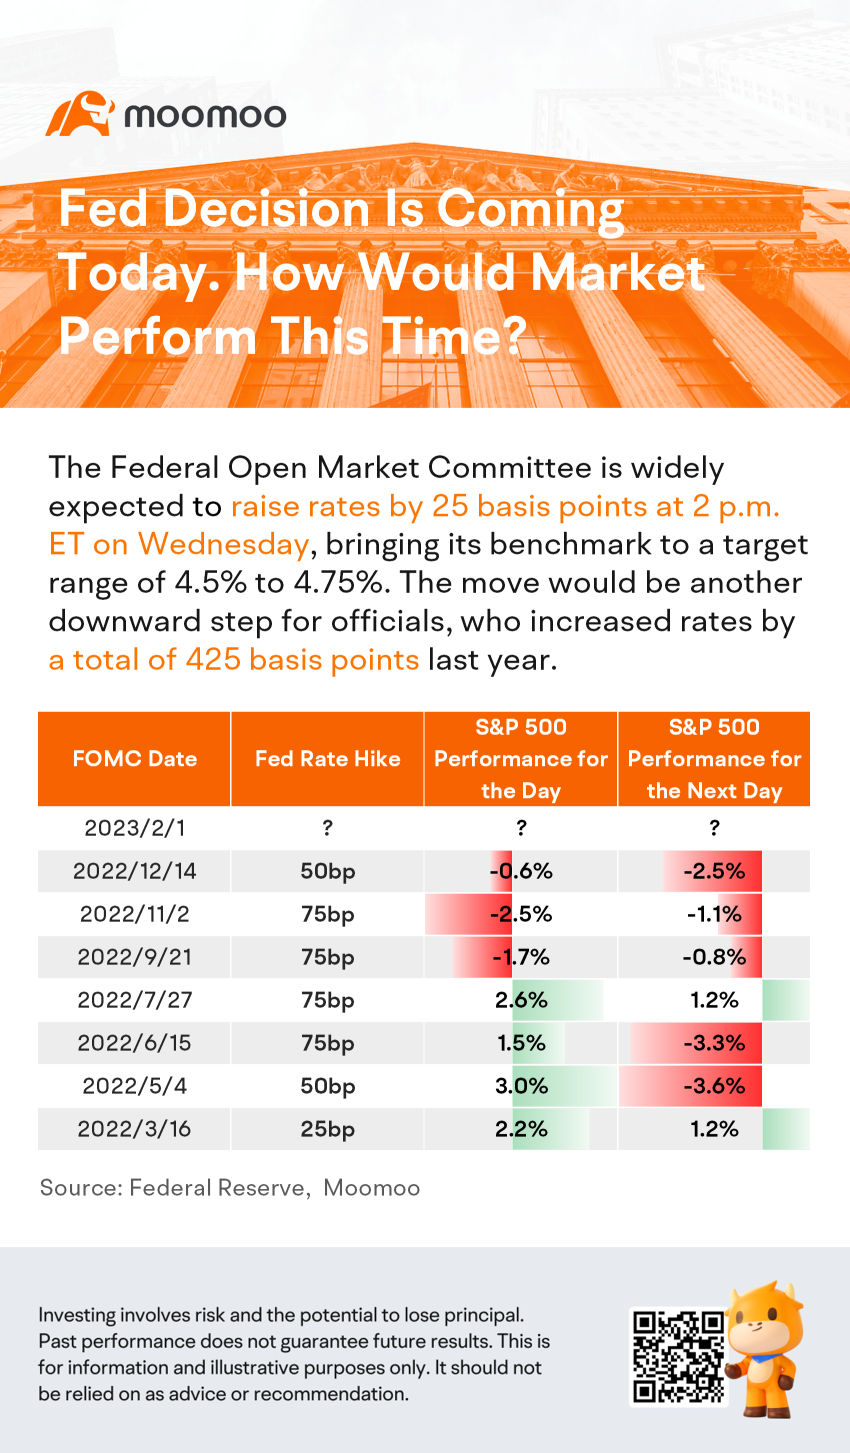 Fed Decision Is Coming Today. How Would Market Perform This Time?